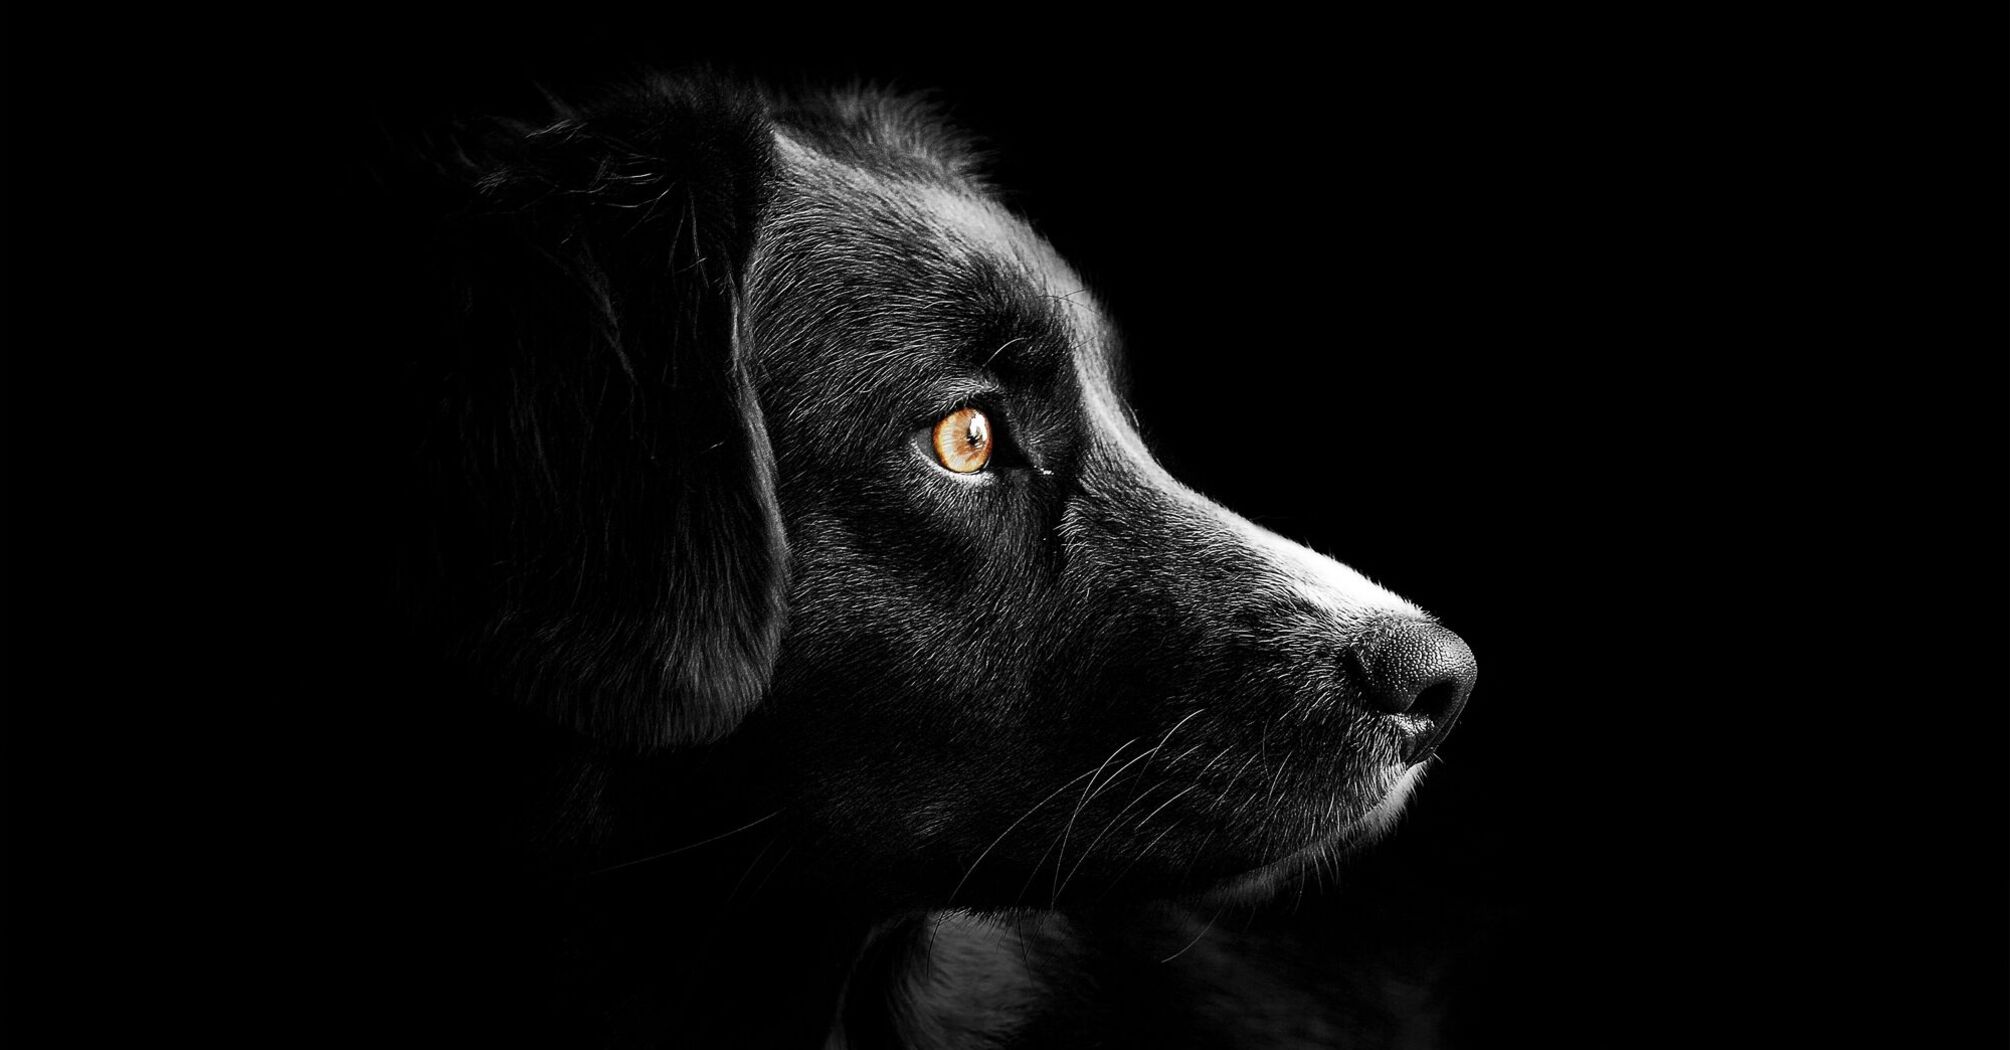 Close-up of a black dog's face with a focused expression